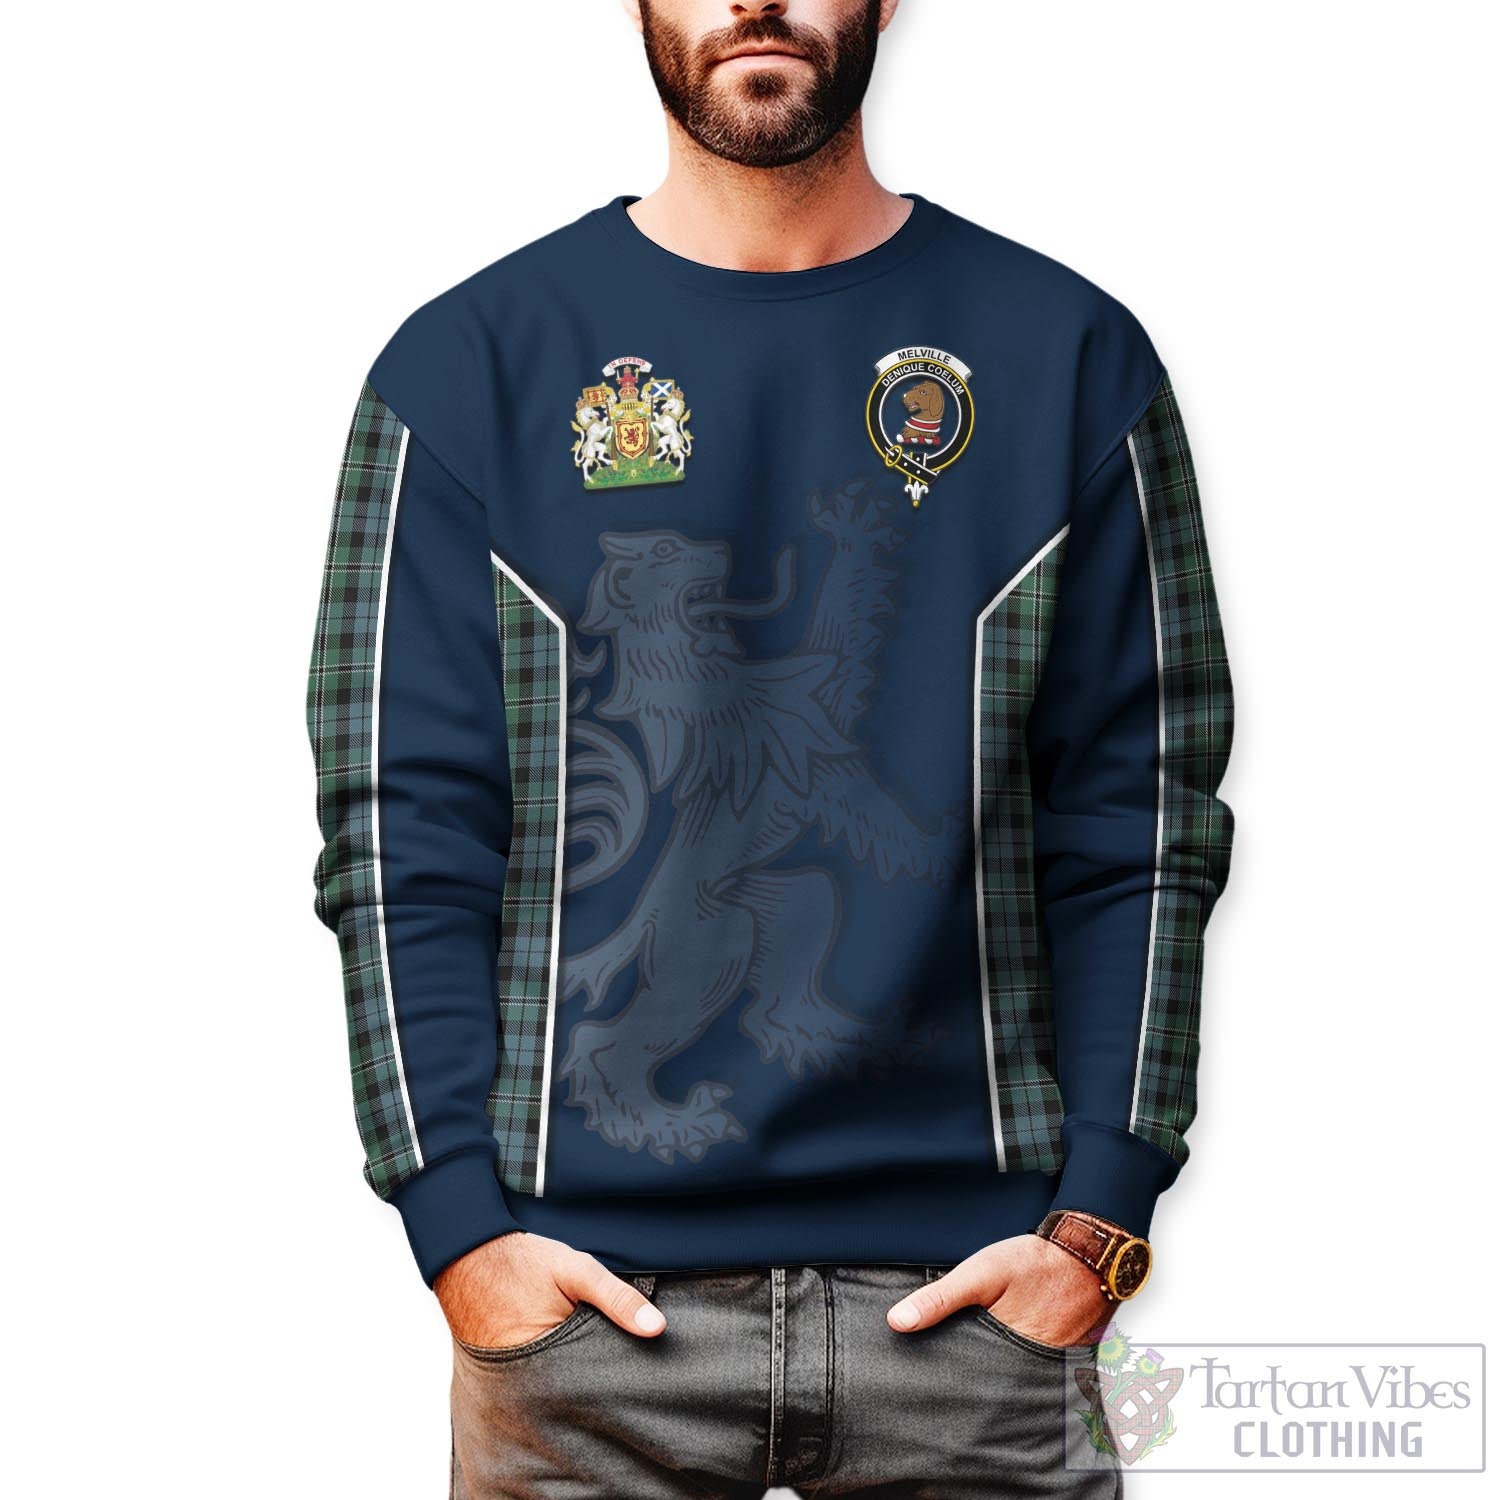 Tartan Vibes Clothing Melville Tartan Sweater with Family Crest and Lion Rampant Vibes Sport Style